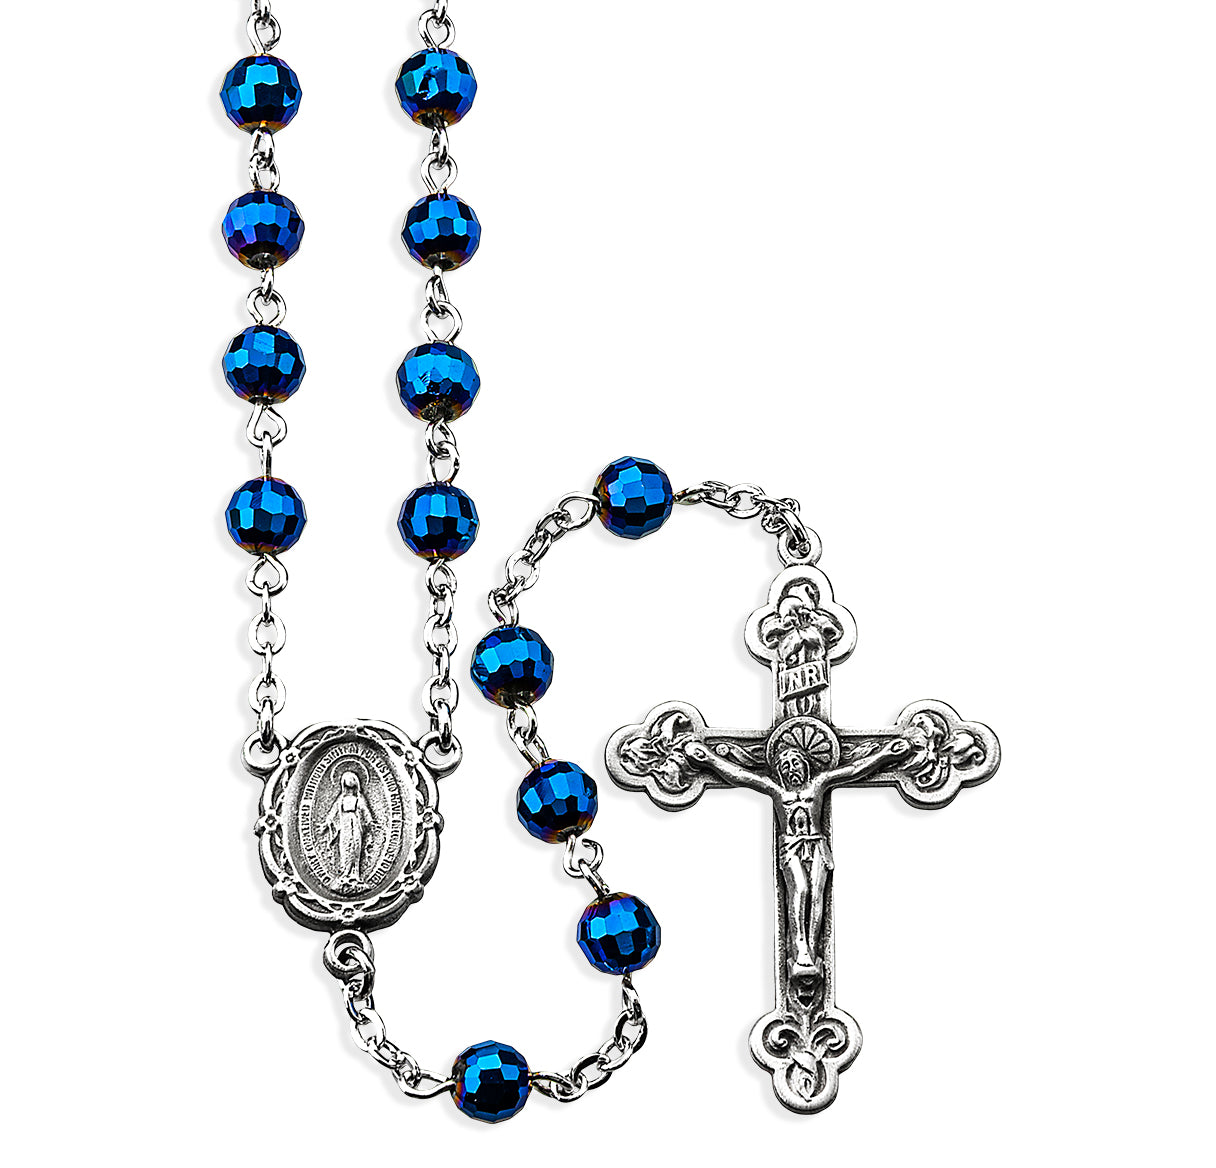 Blue Bead Rosary with Pewter Crucifix and Center